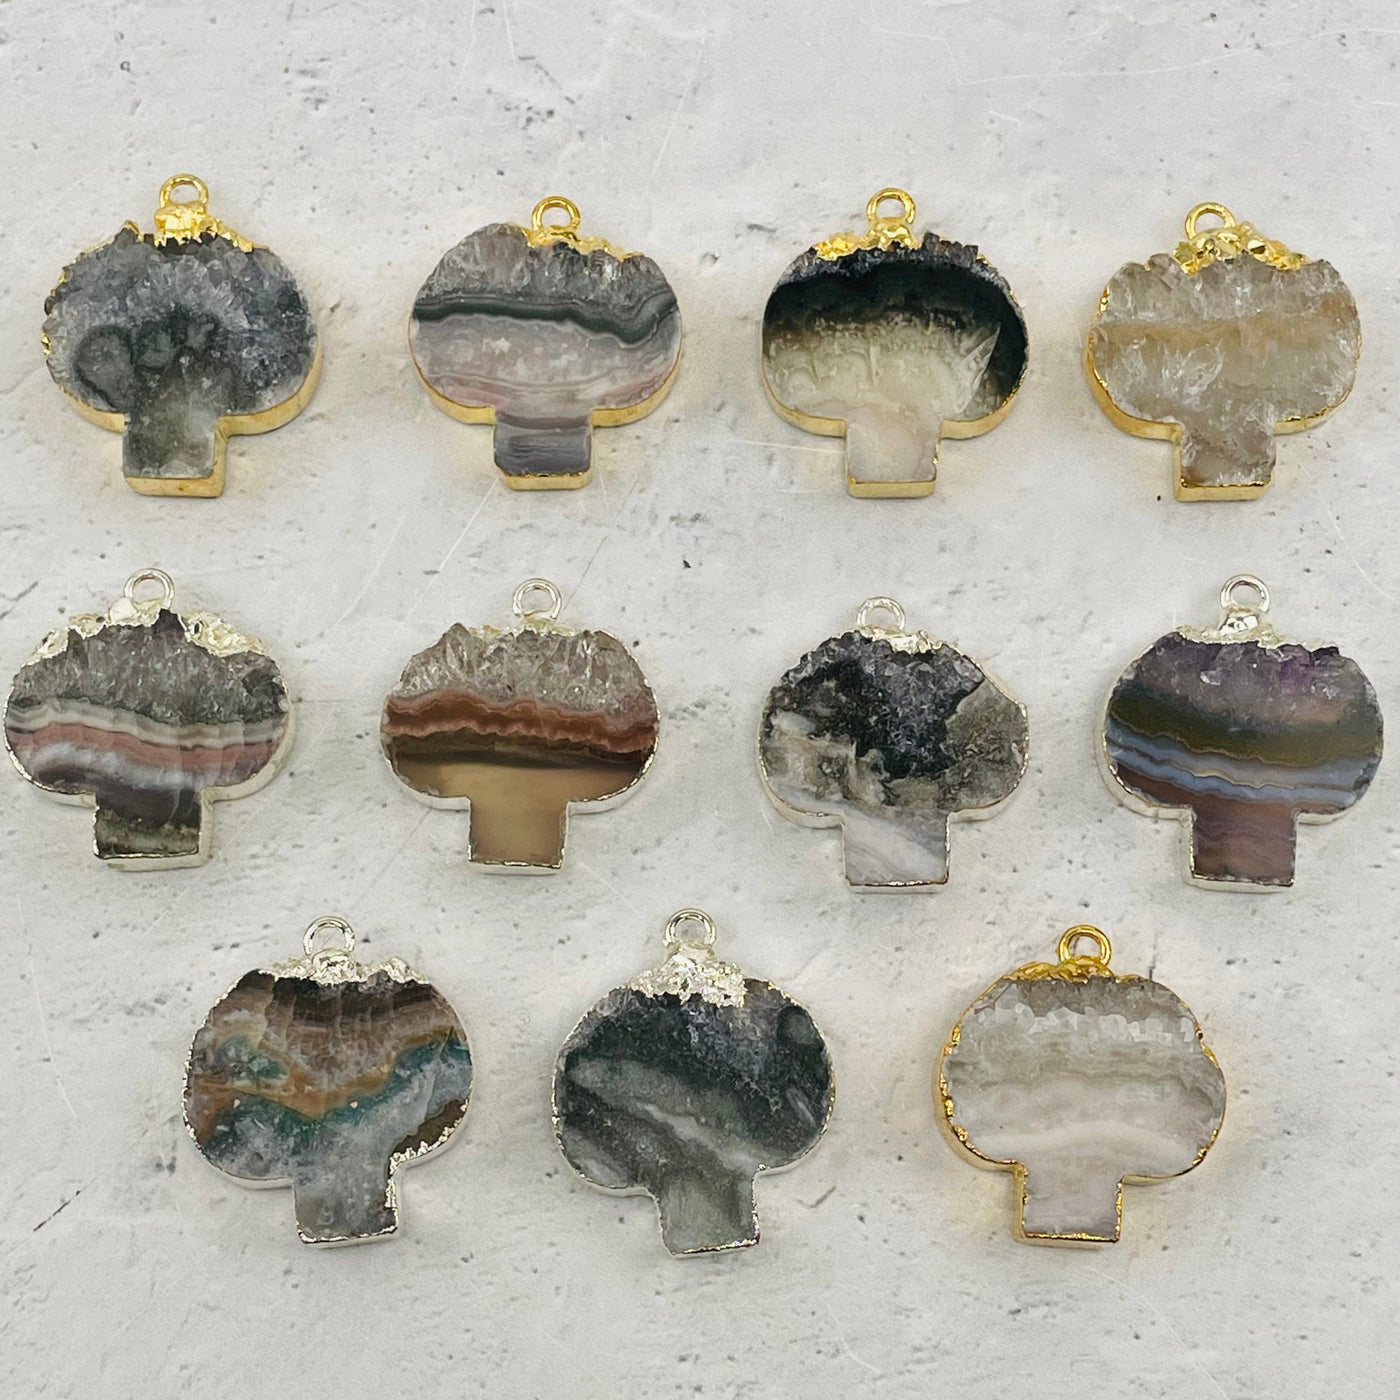 multiple pendants displayed to show the differences in the color shades